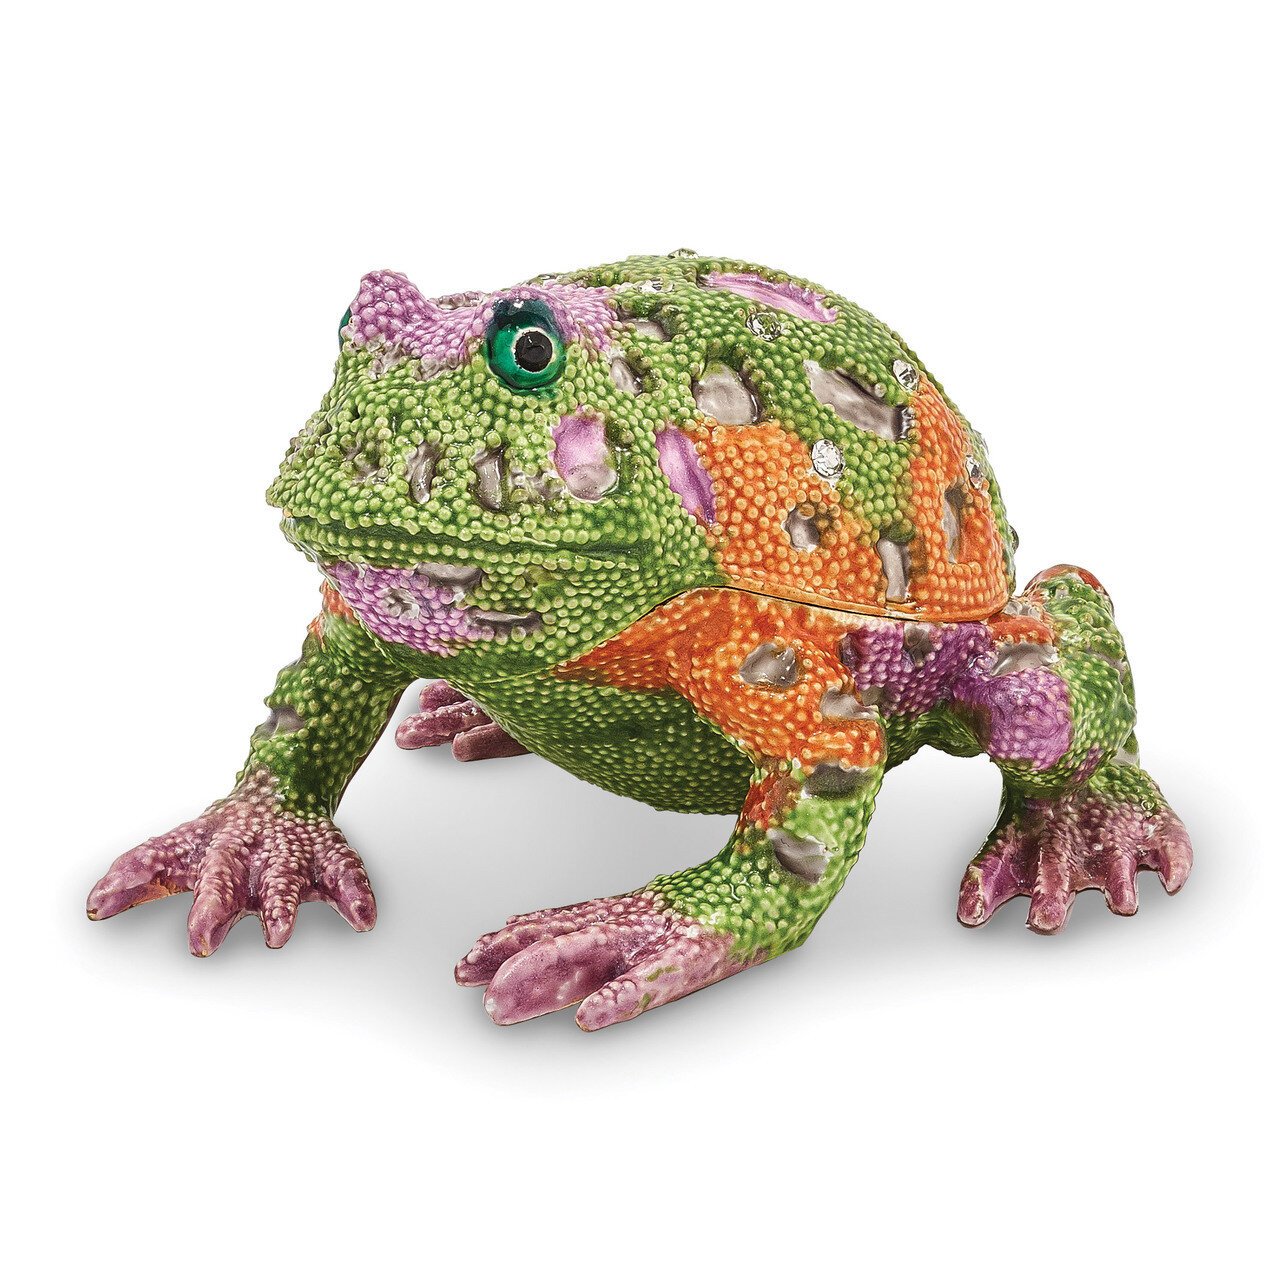 Psychedelic Frog Trinket Box Enamel on Pewter by Jere